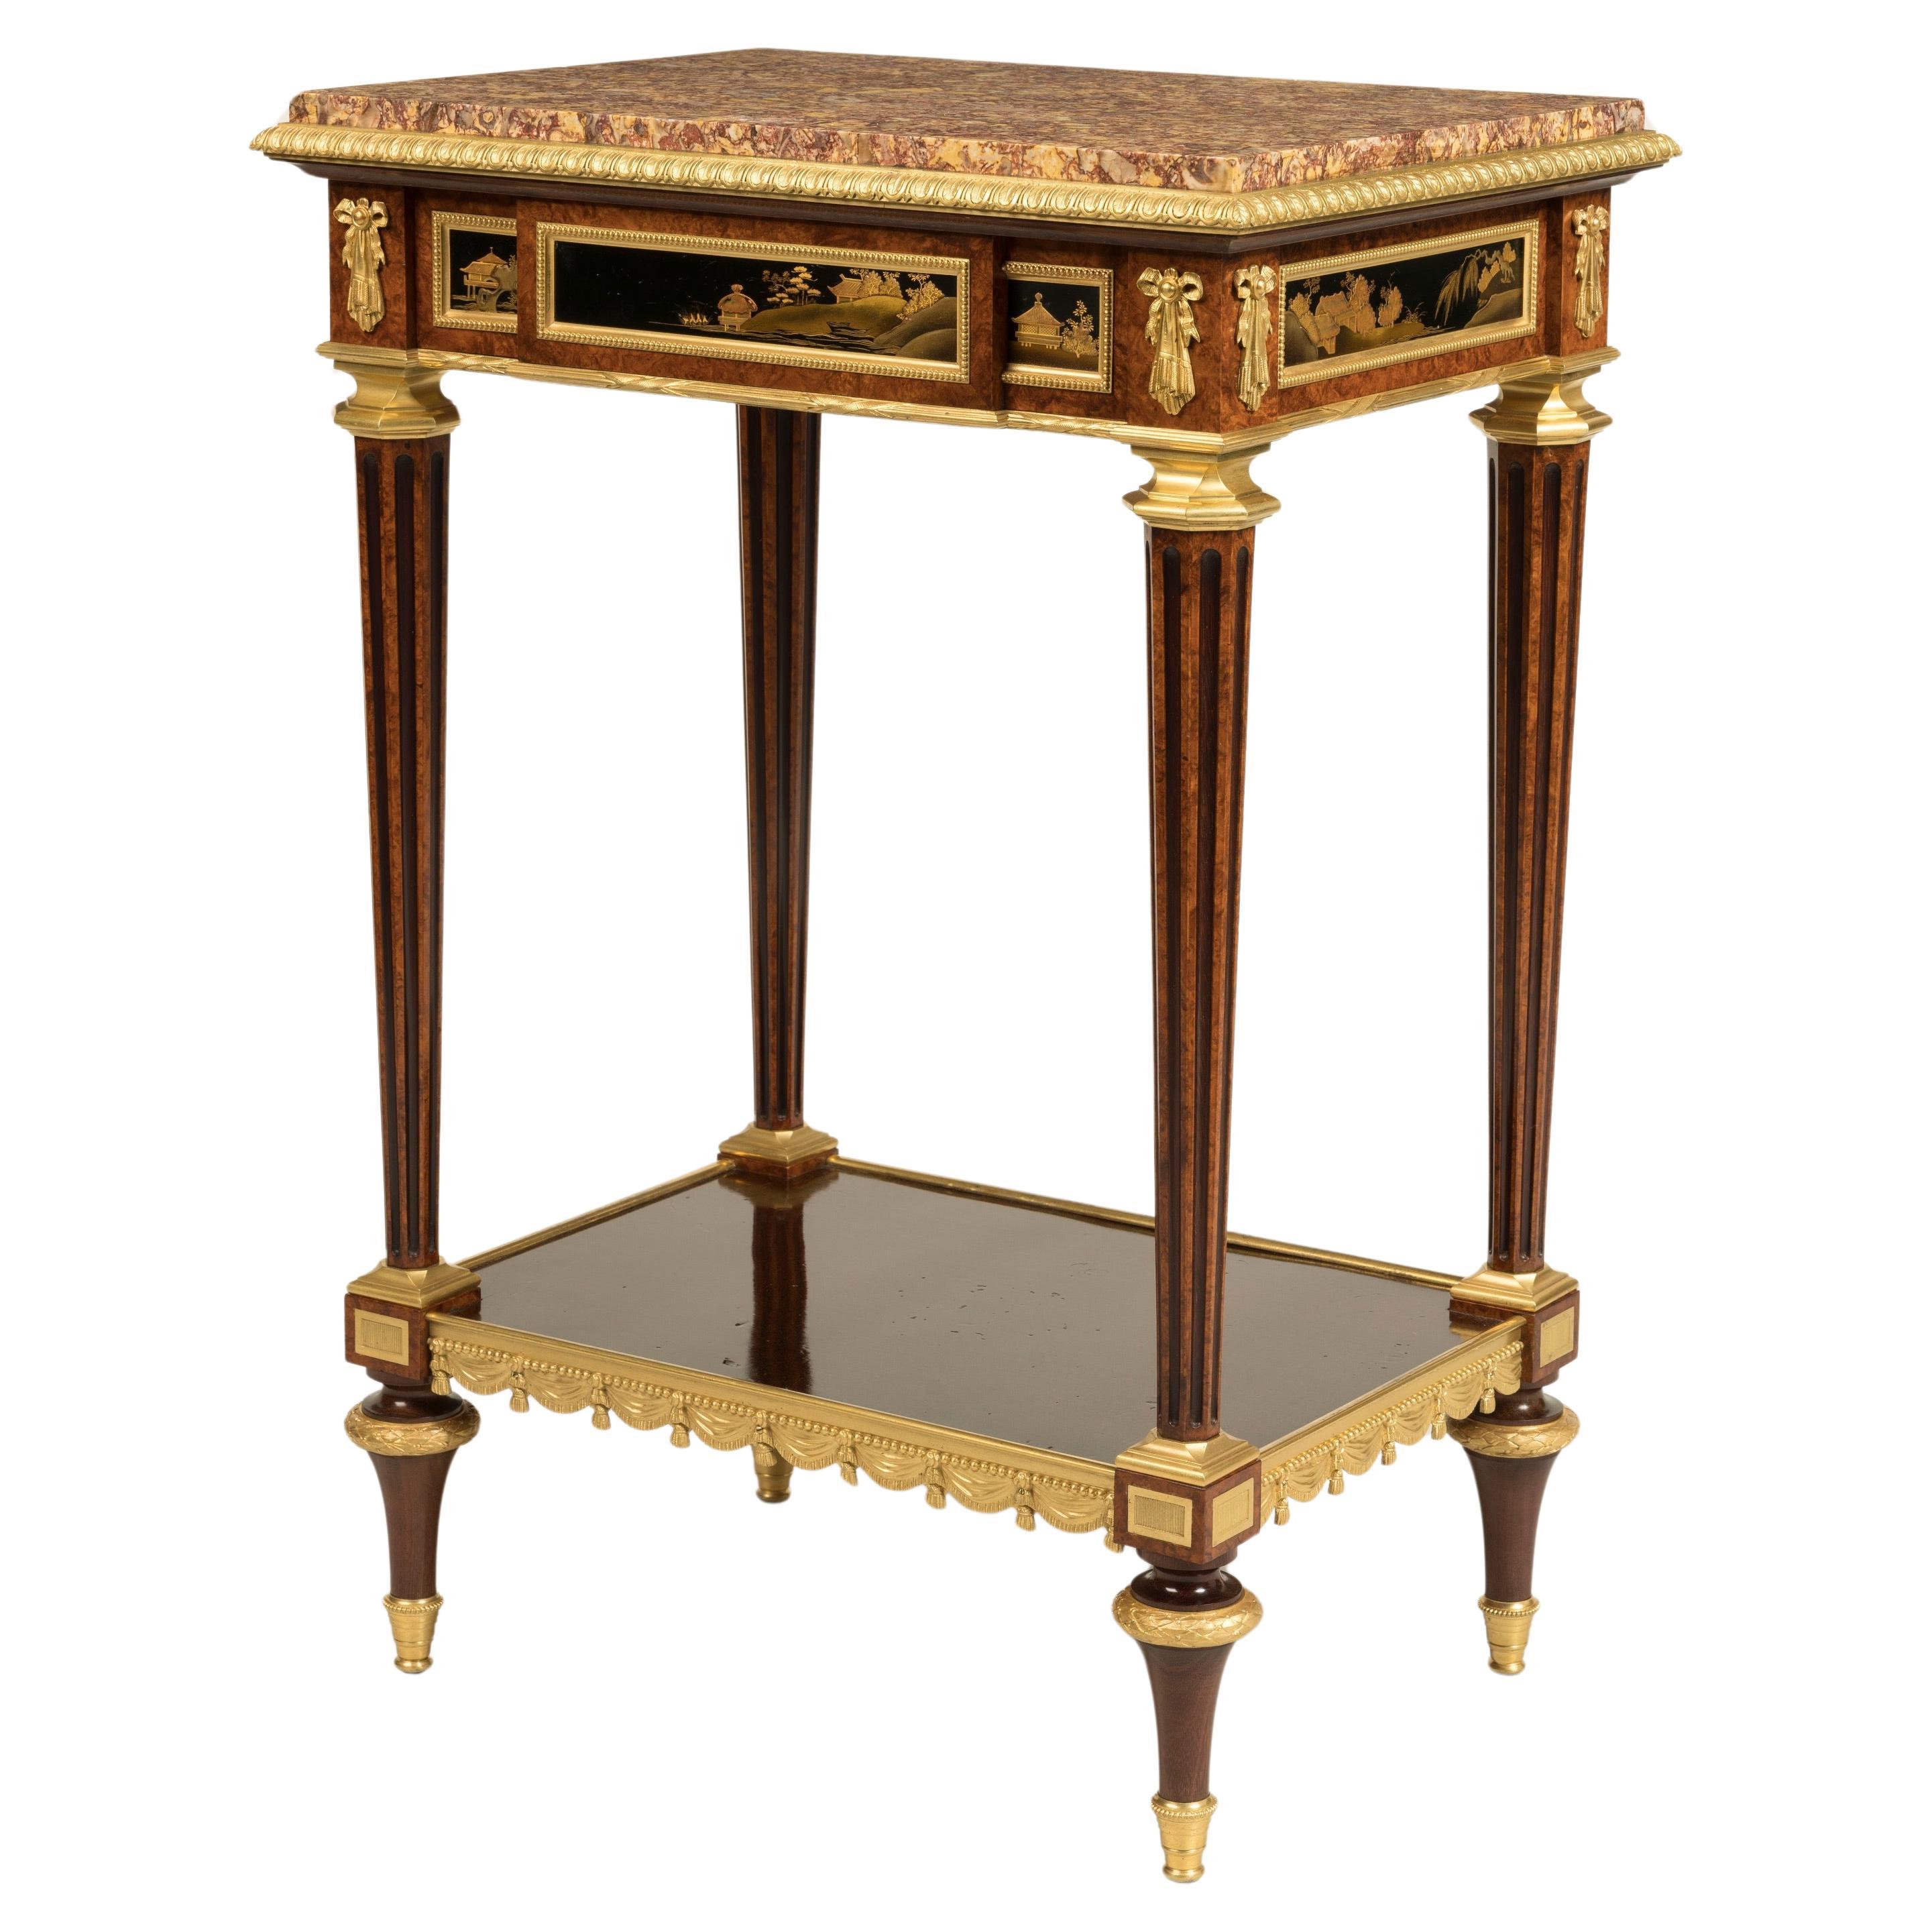 19th Century Marble-Top Lacquer Table in the Louis XVI Style by Henry Dasson For Sale